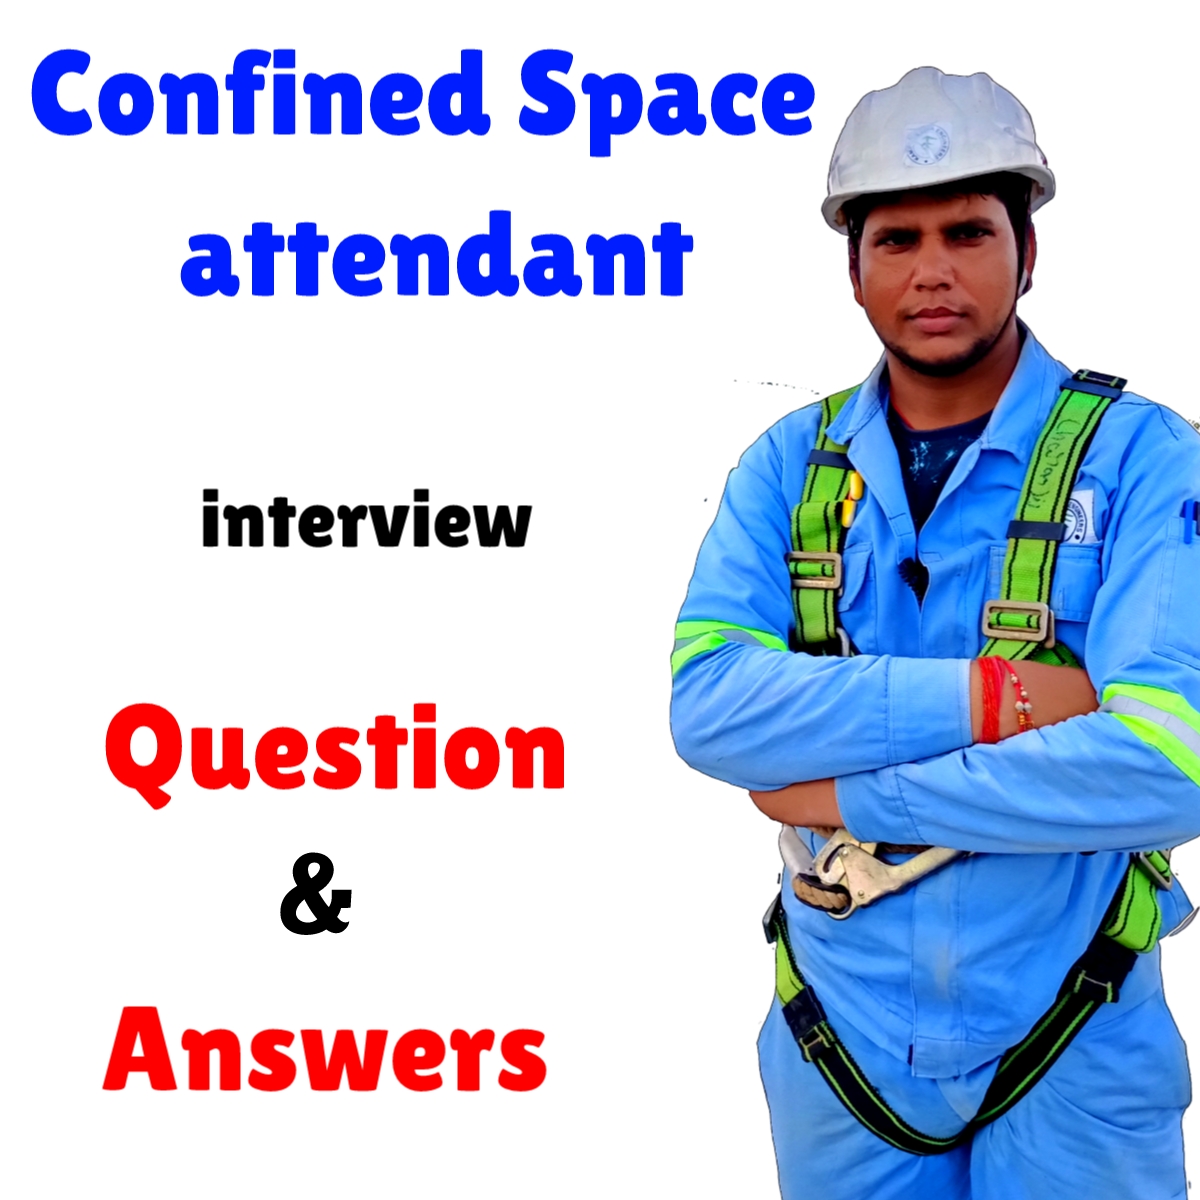 confined-space-attendent-interview-questions-answers